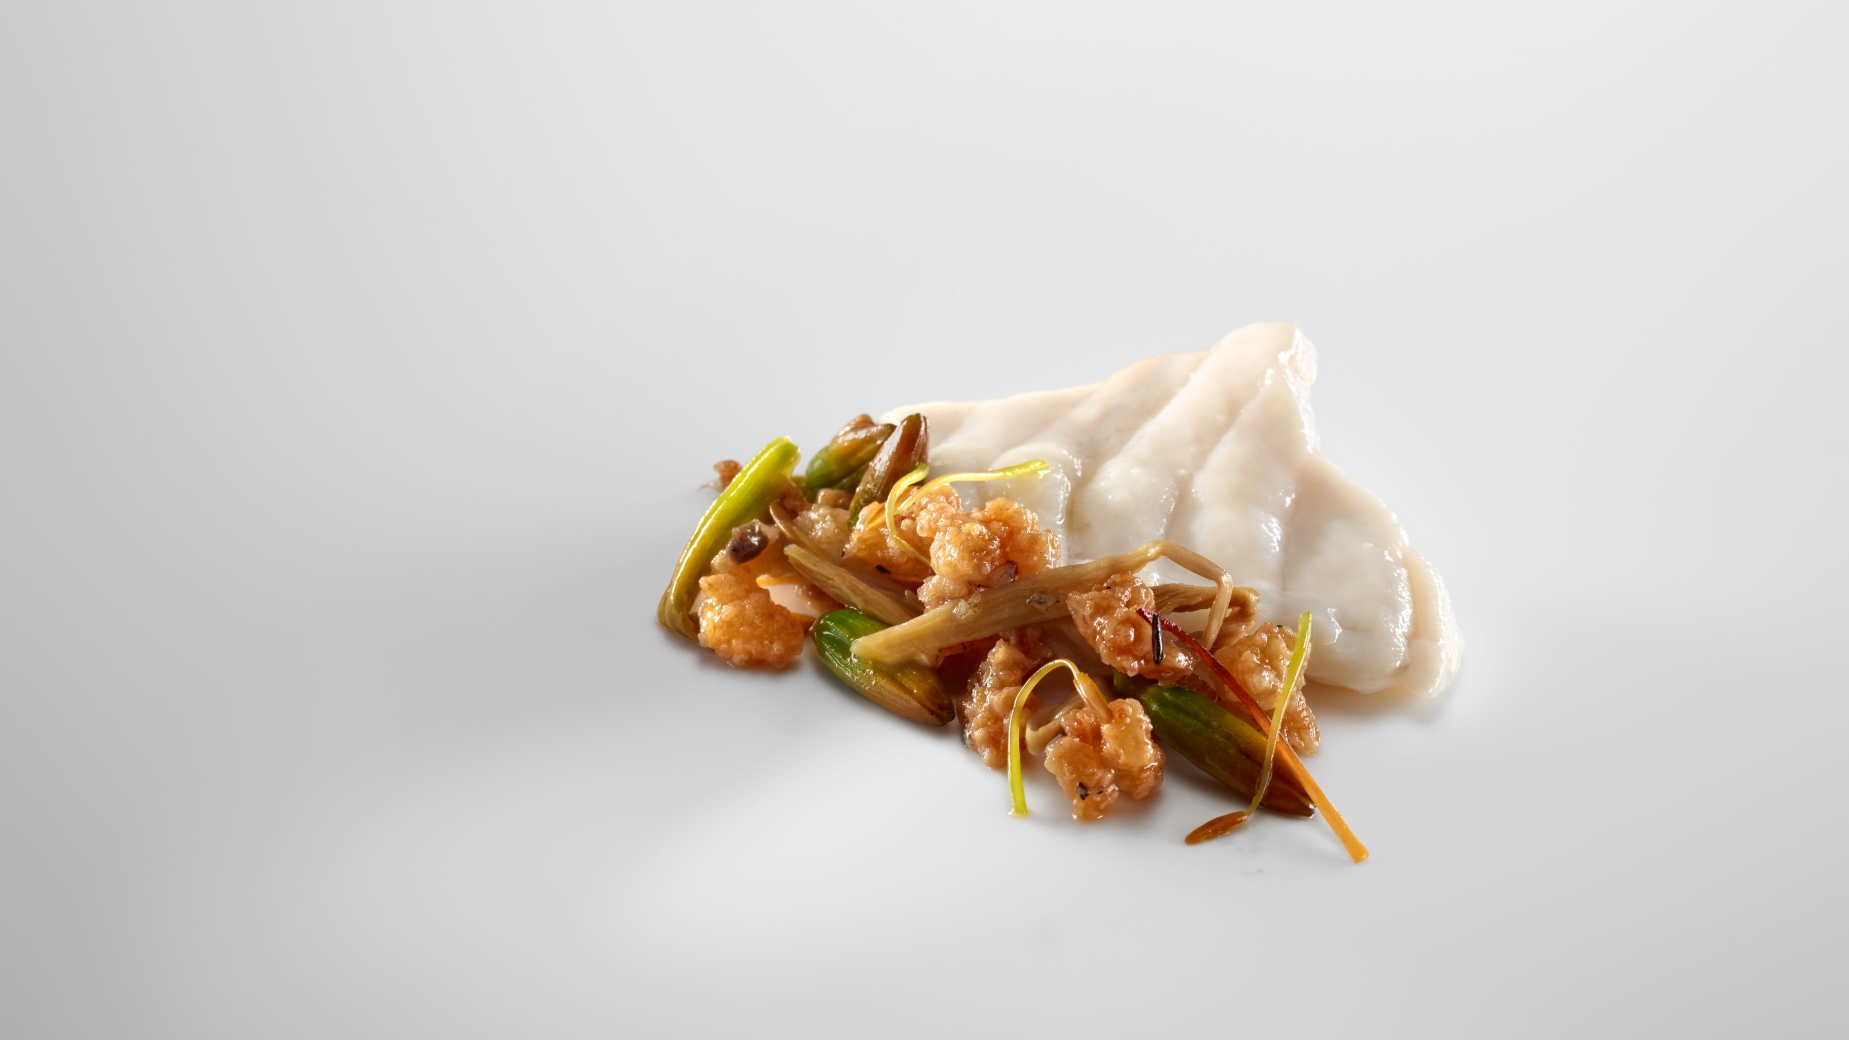 Slices of monkfish cooked with the steam of its bones. Crispy stew of roasted rinds and lilies.
PHOTO: José Luis López de Zubiría / Mugaritz